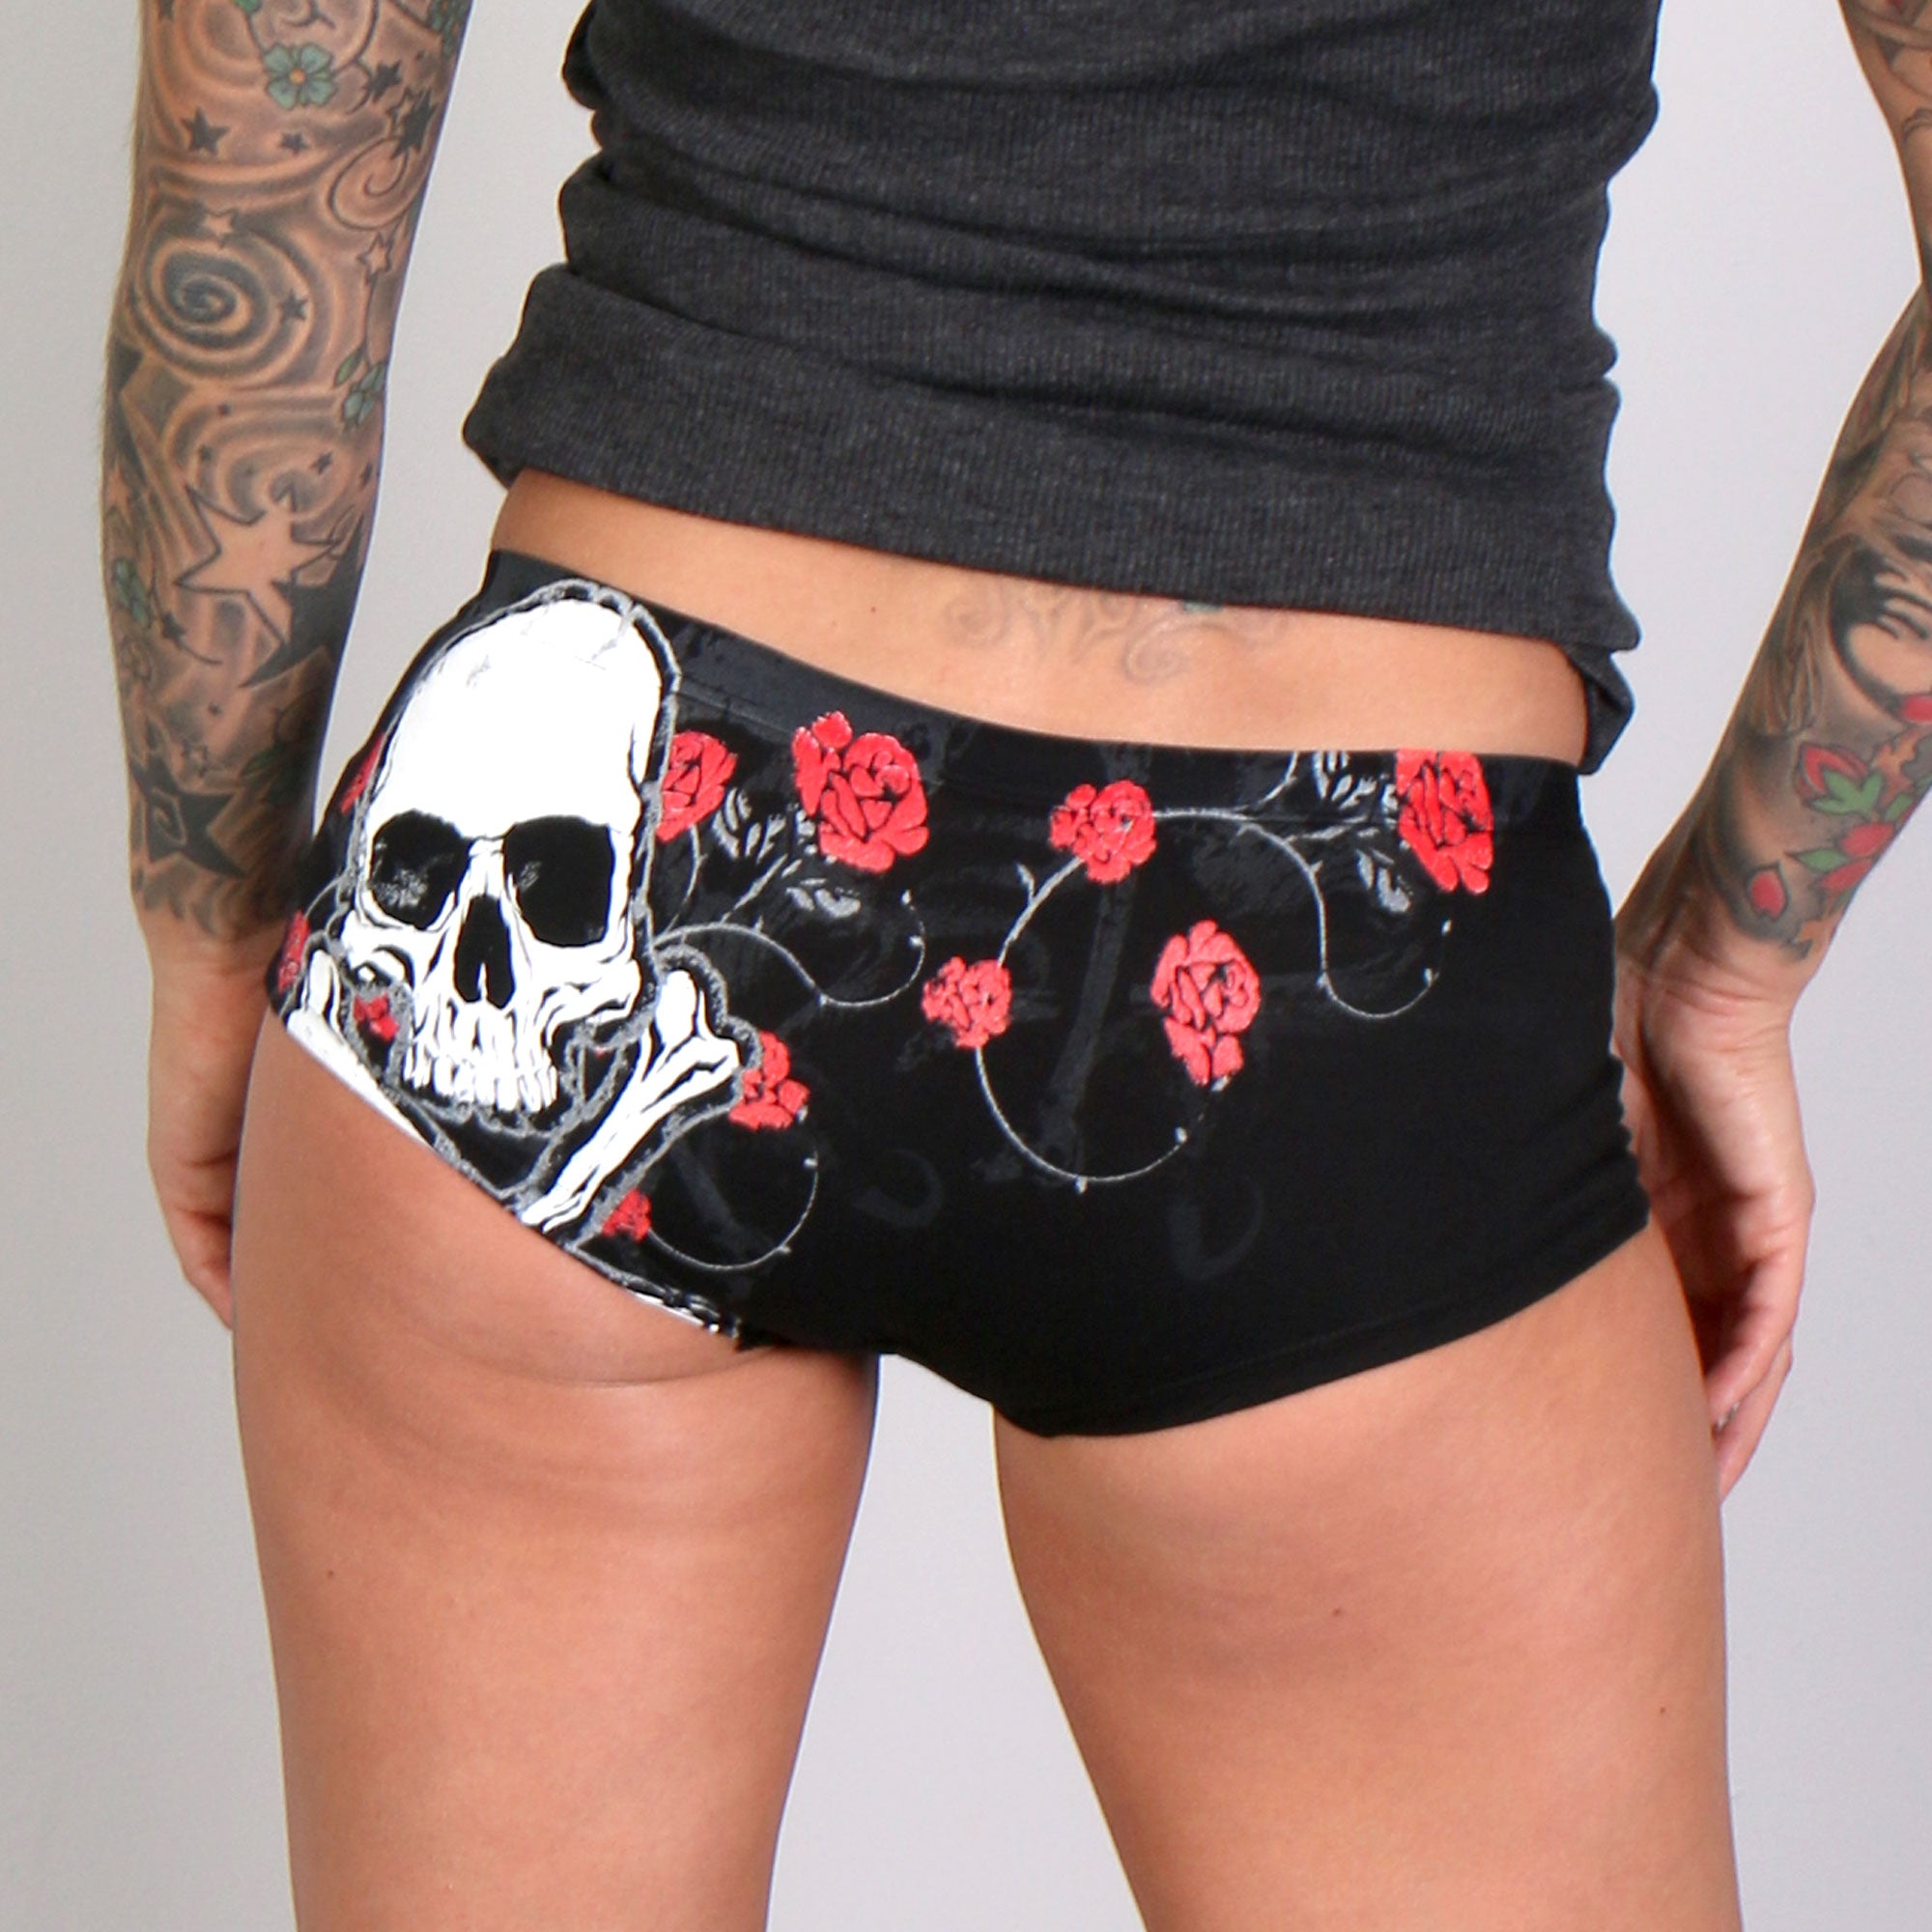 Hot Leathers PTB7007 Red Roses Boy Shorts